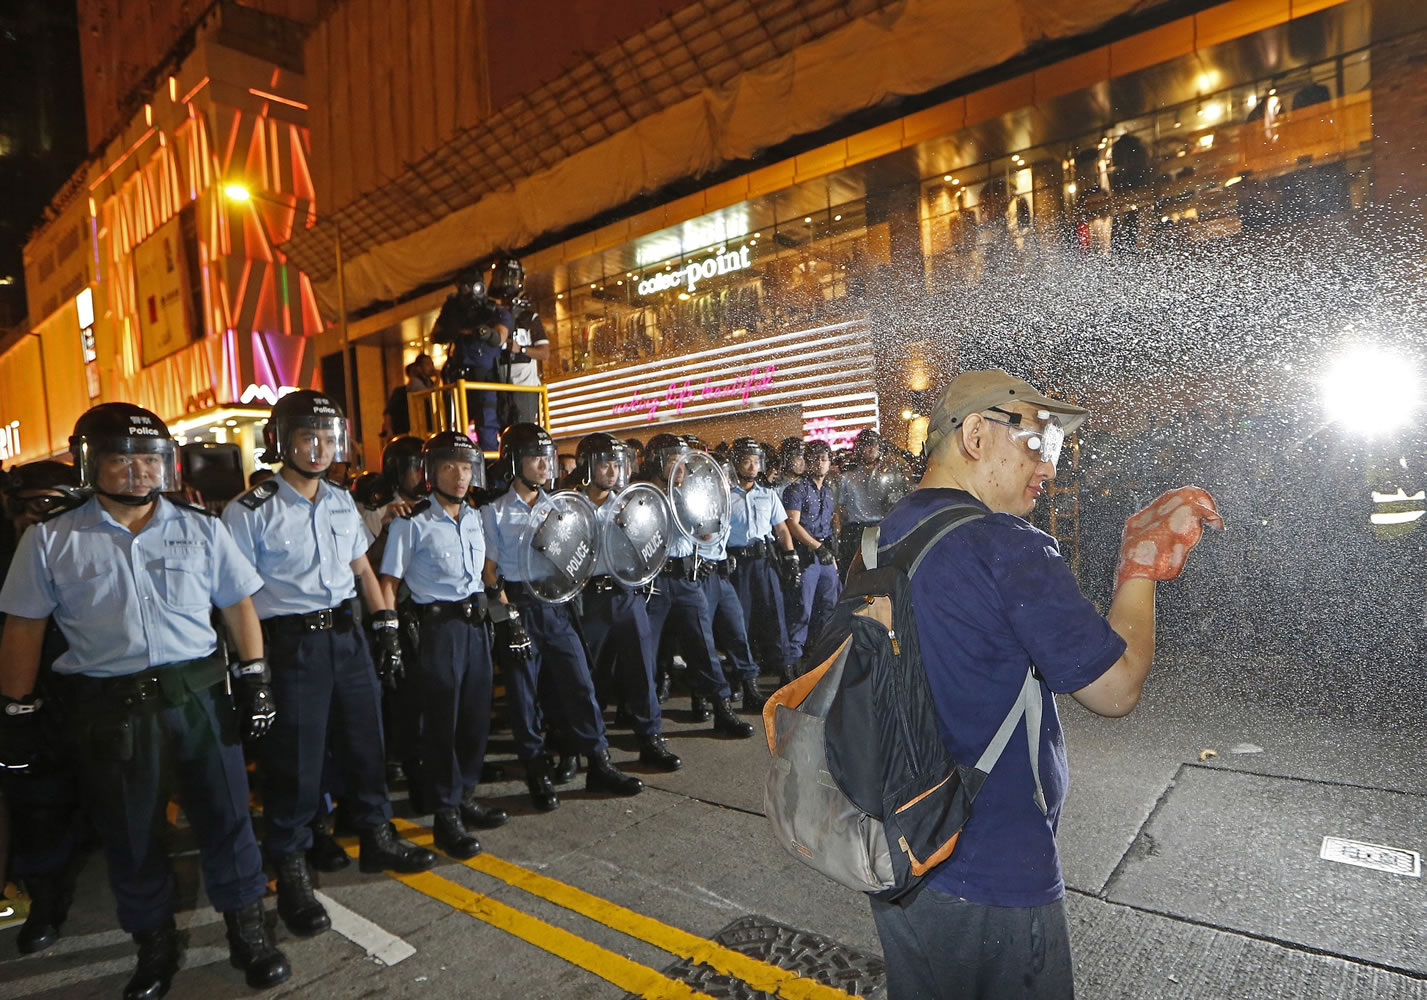 A demonstrator gets sprayed with pepper spray by the police as demonstrators refused to leave after workers began clearing away barricades at an occupied area in Mong Kok district of Hong Kong on Tuesday.